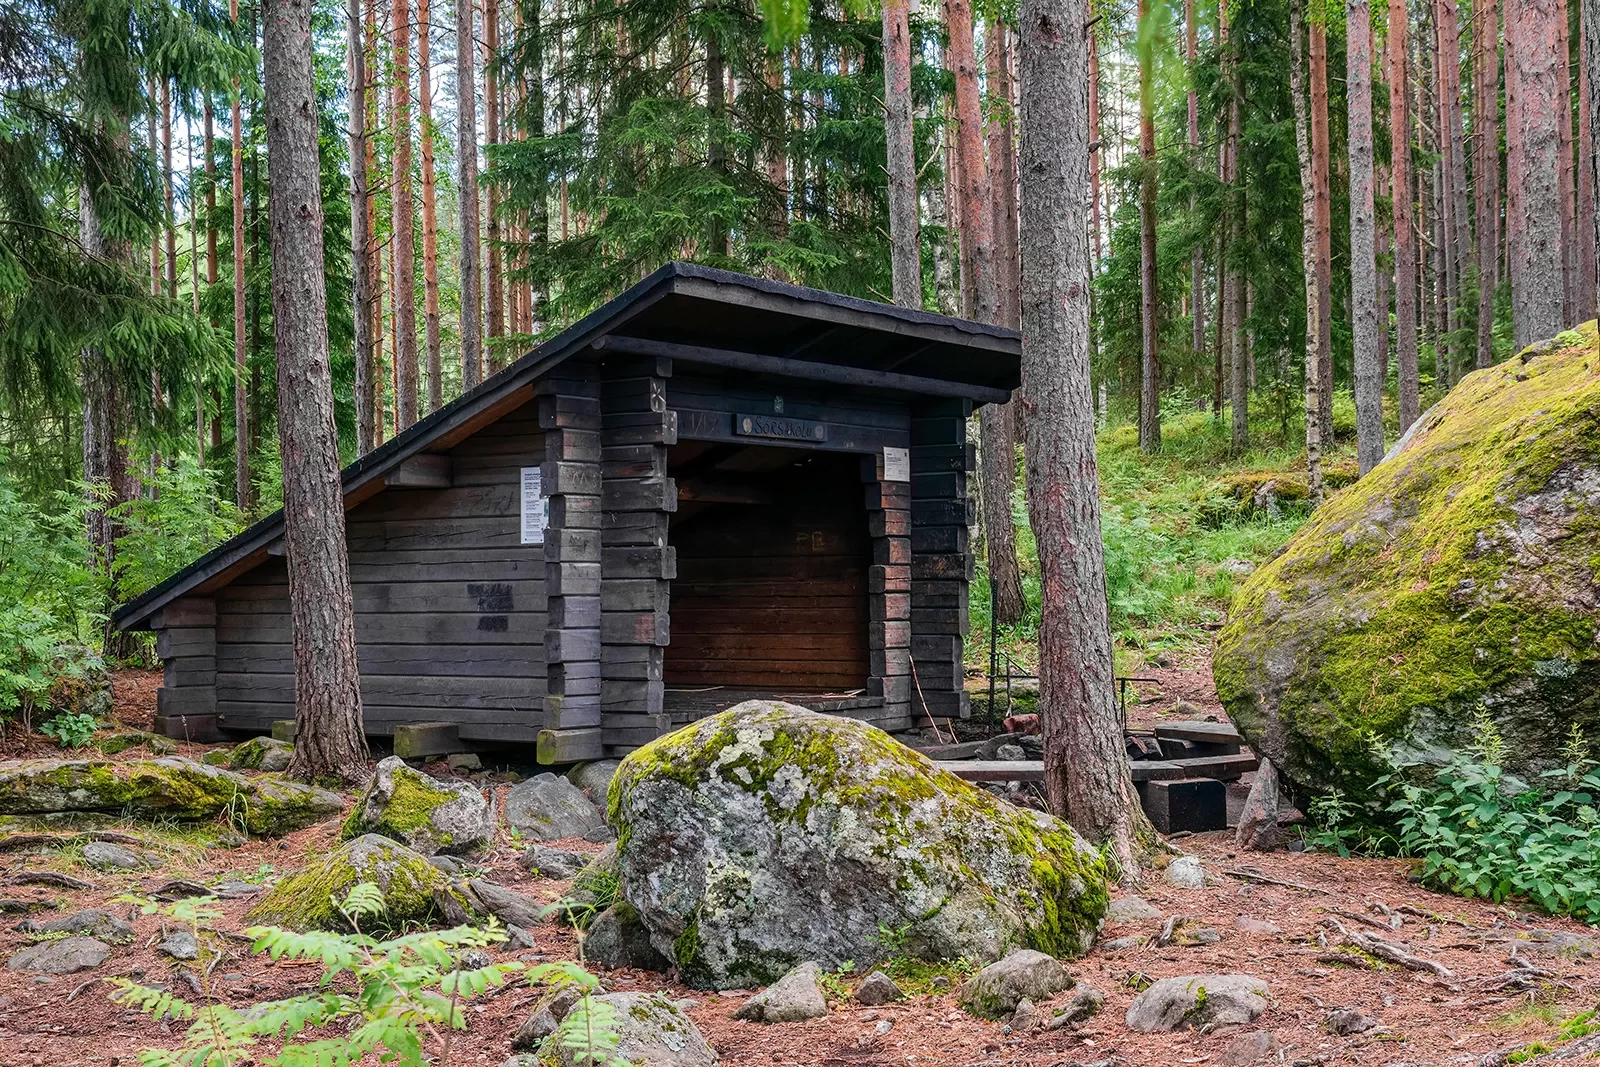 Wooden shelter in the middle of a forest